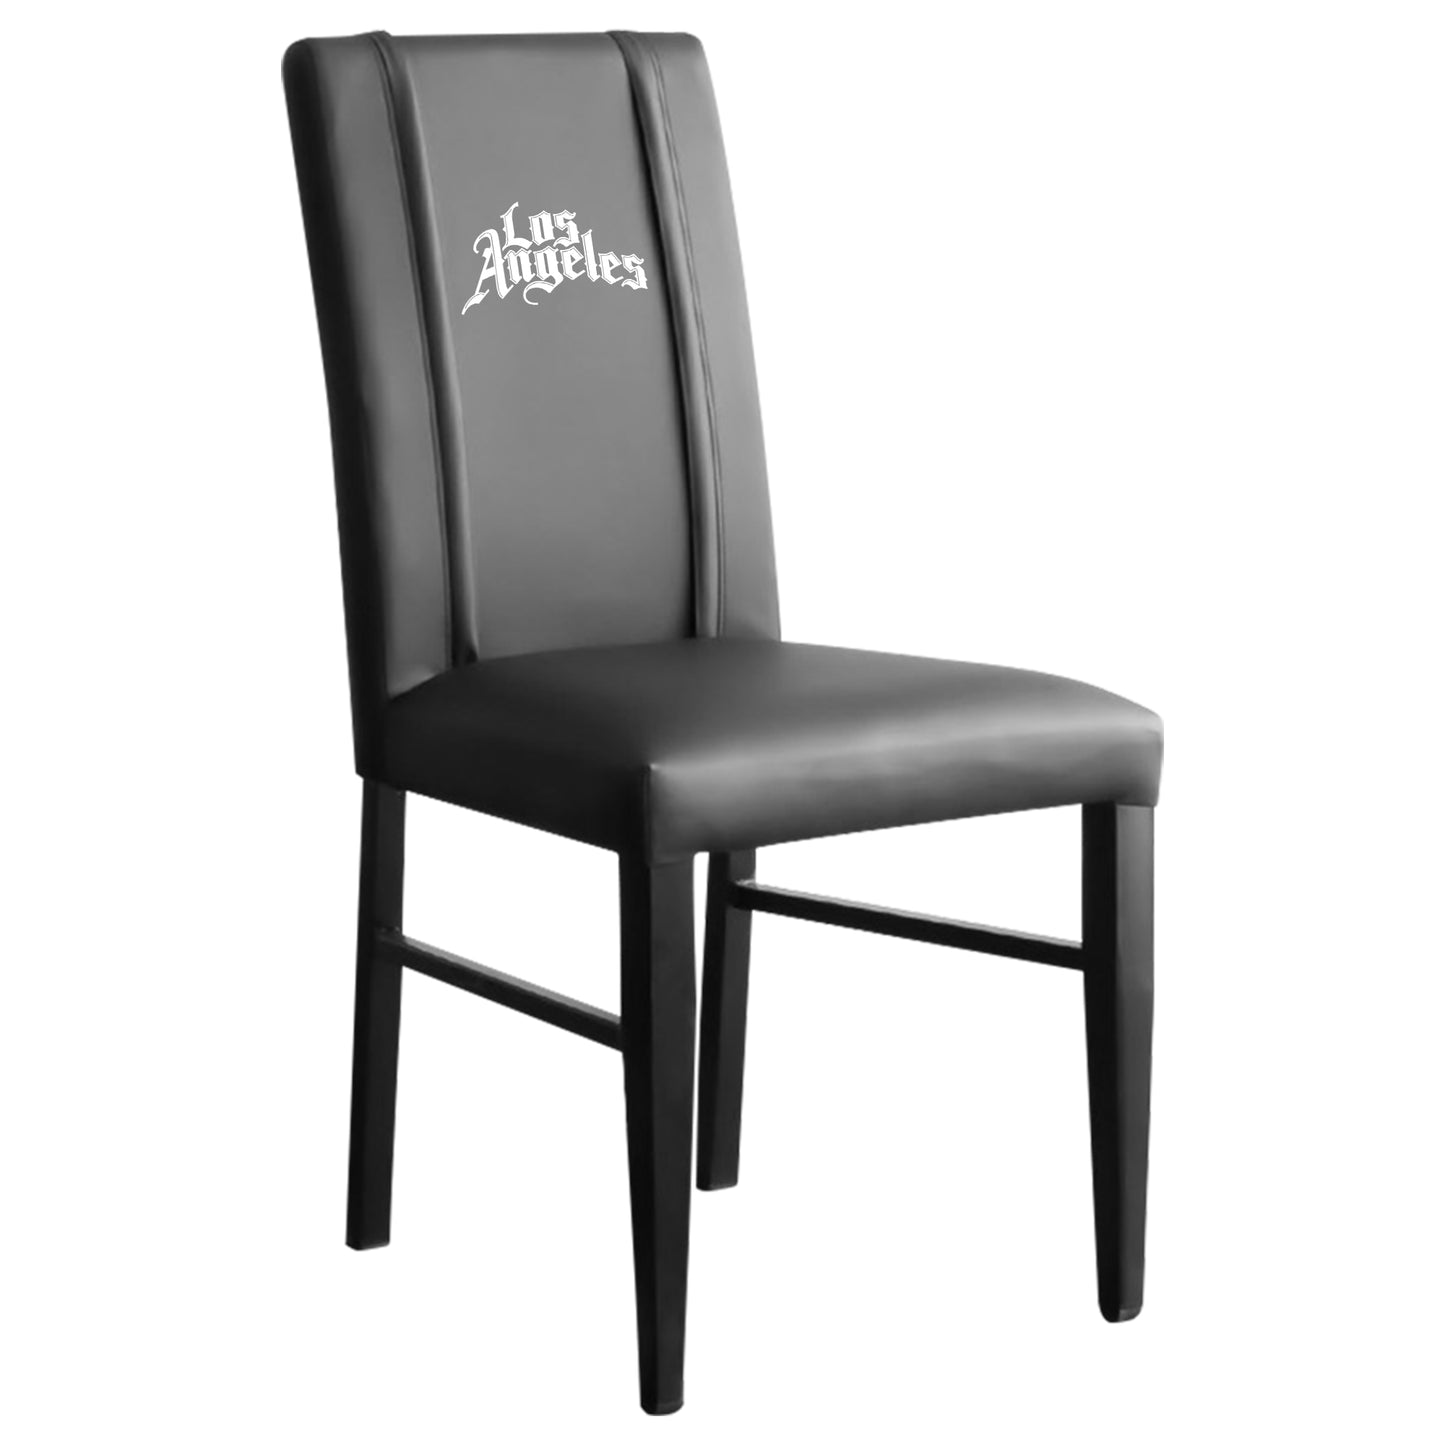 Side Chair 2000 with Los Angeles Clippers Alternate Logo Set of 2